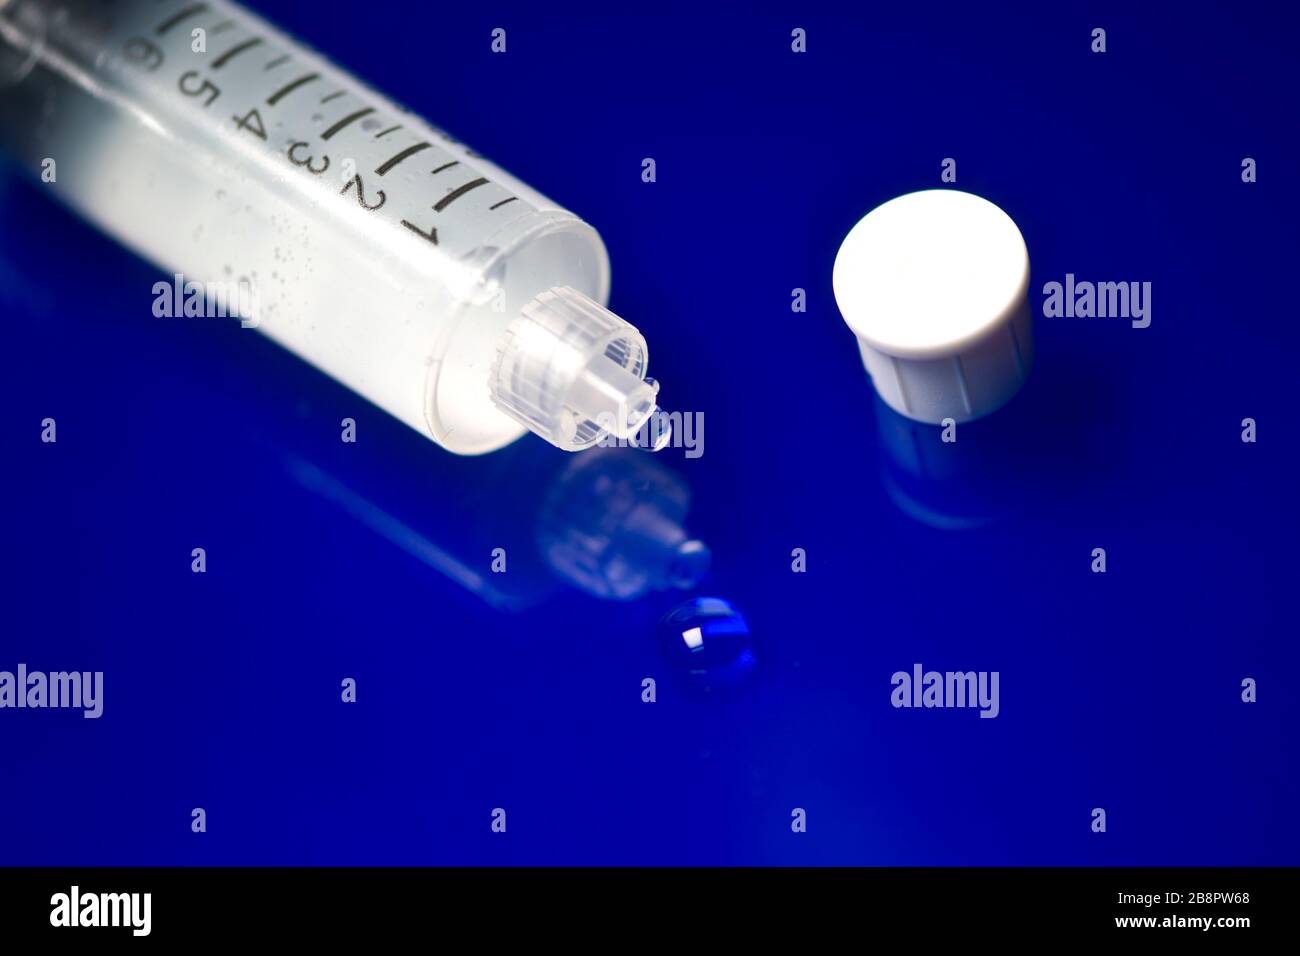 Pre-filled Sterile Saline injection vial droplet on blue reflective surface. Stock Photo